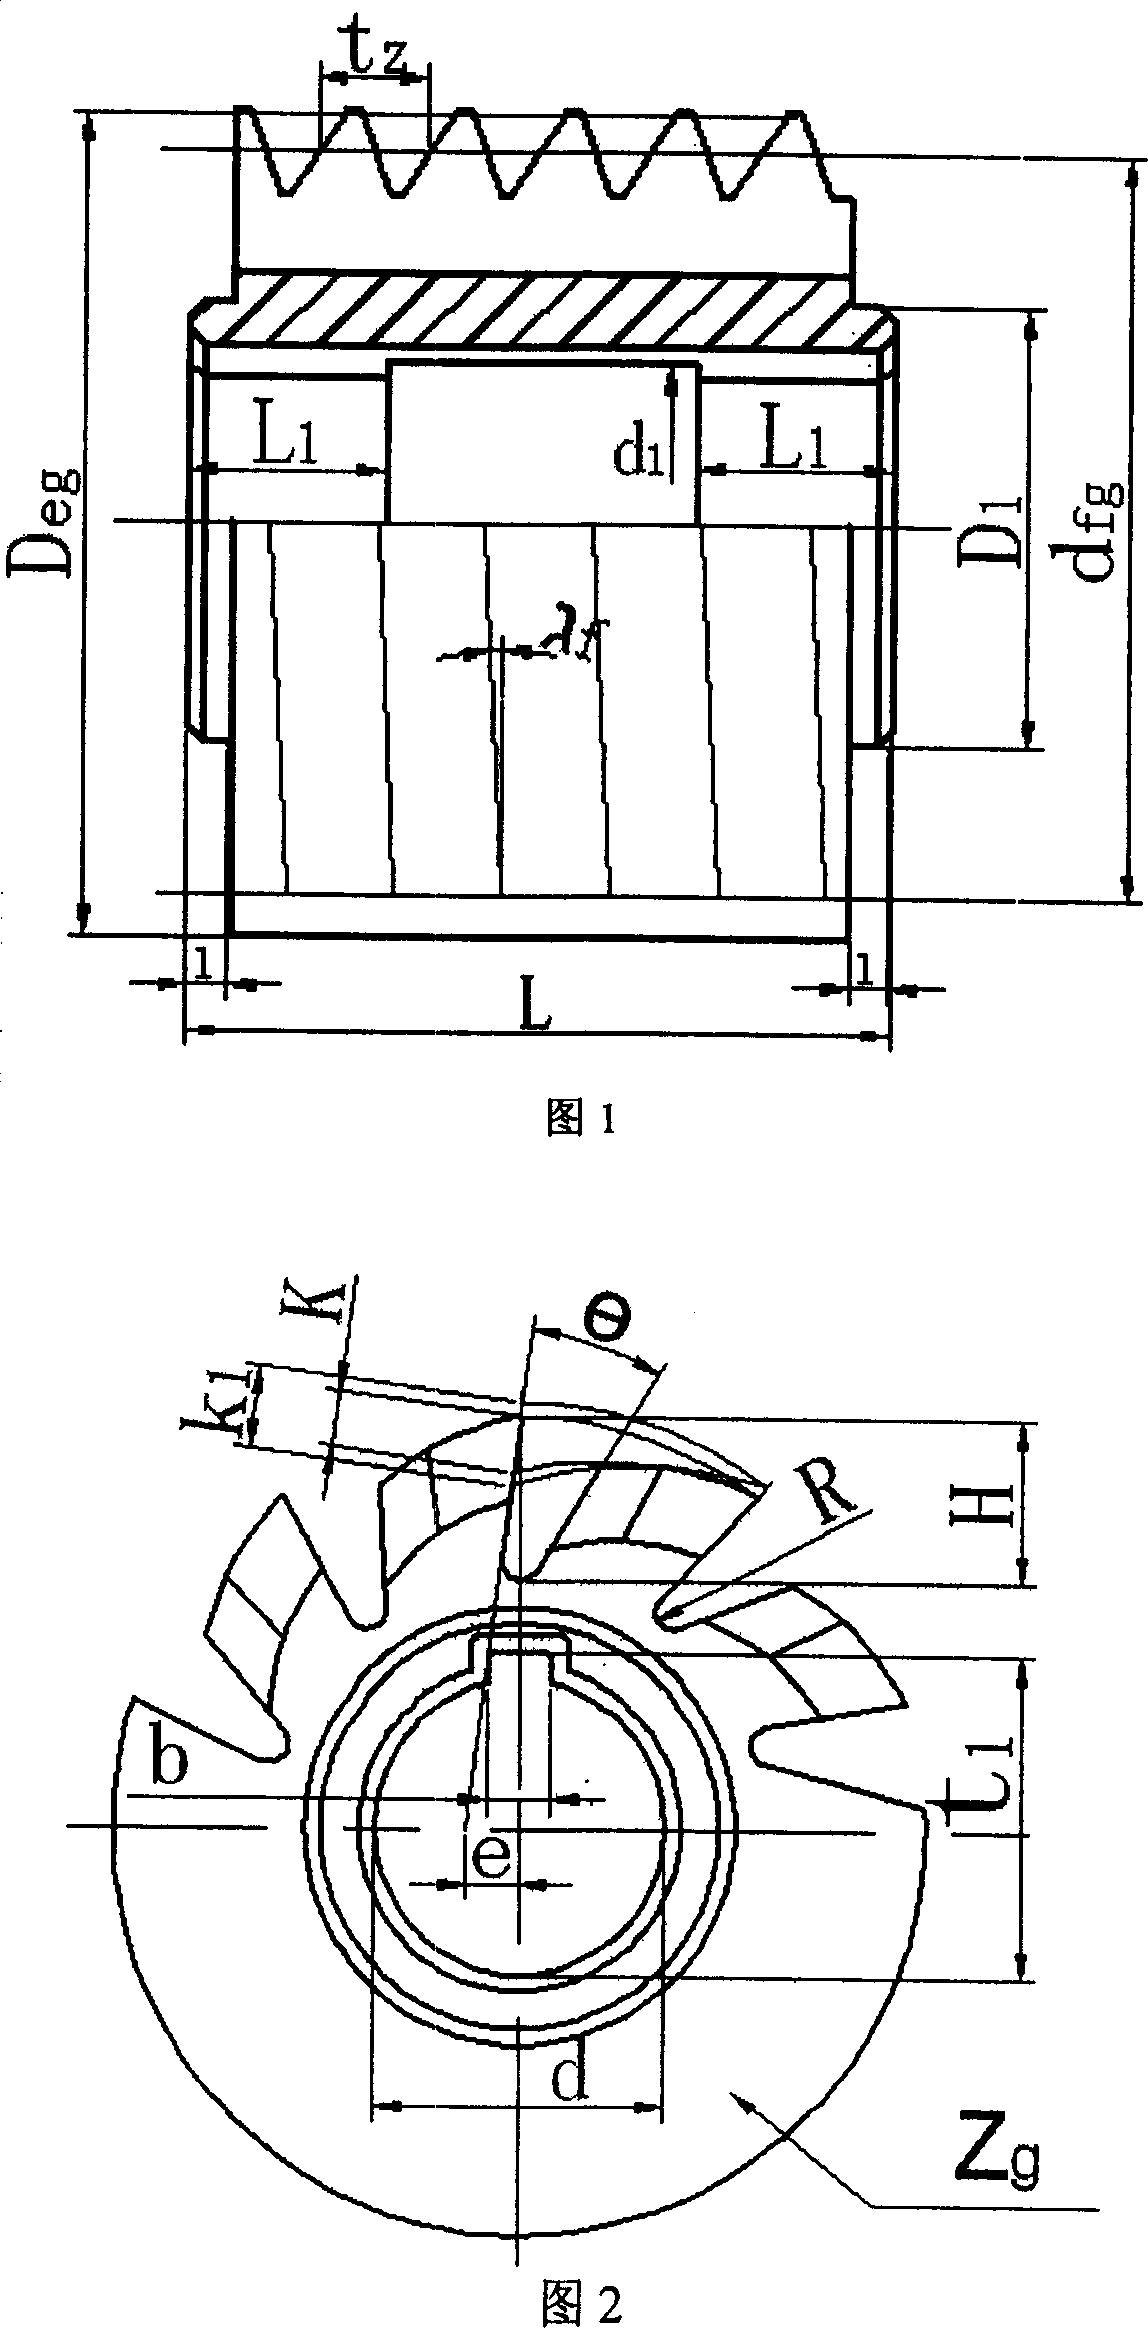 Involute gear hob of asymmetric tooth profile with equal modulus